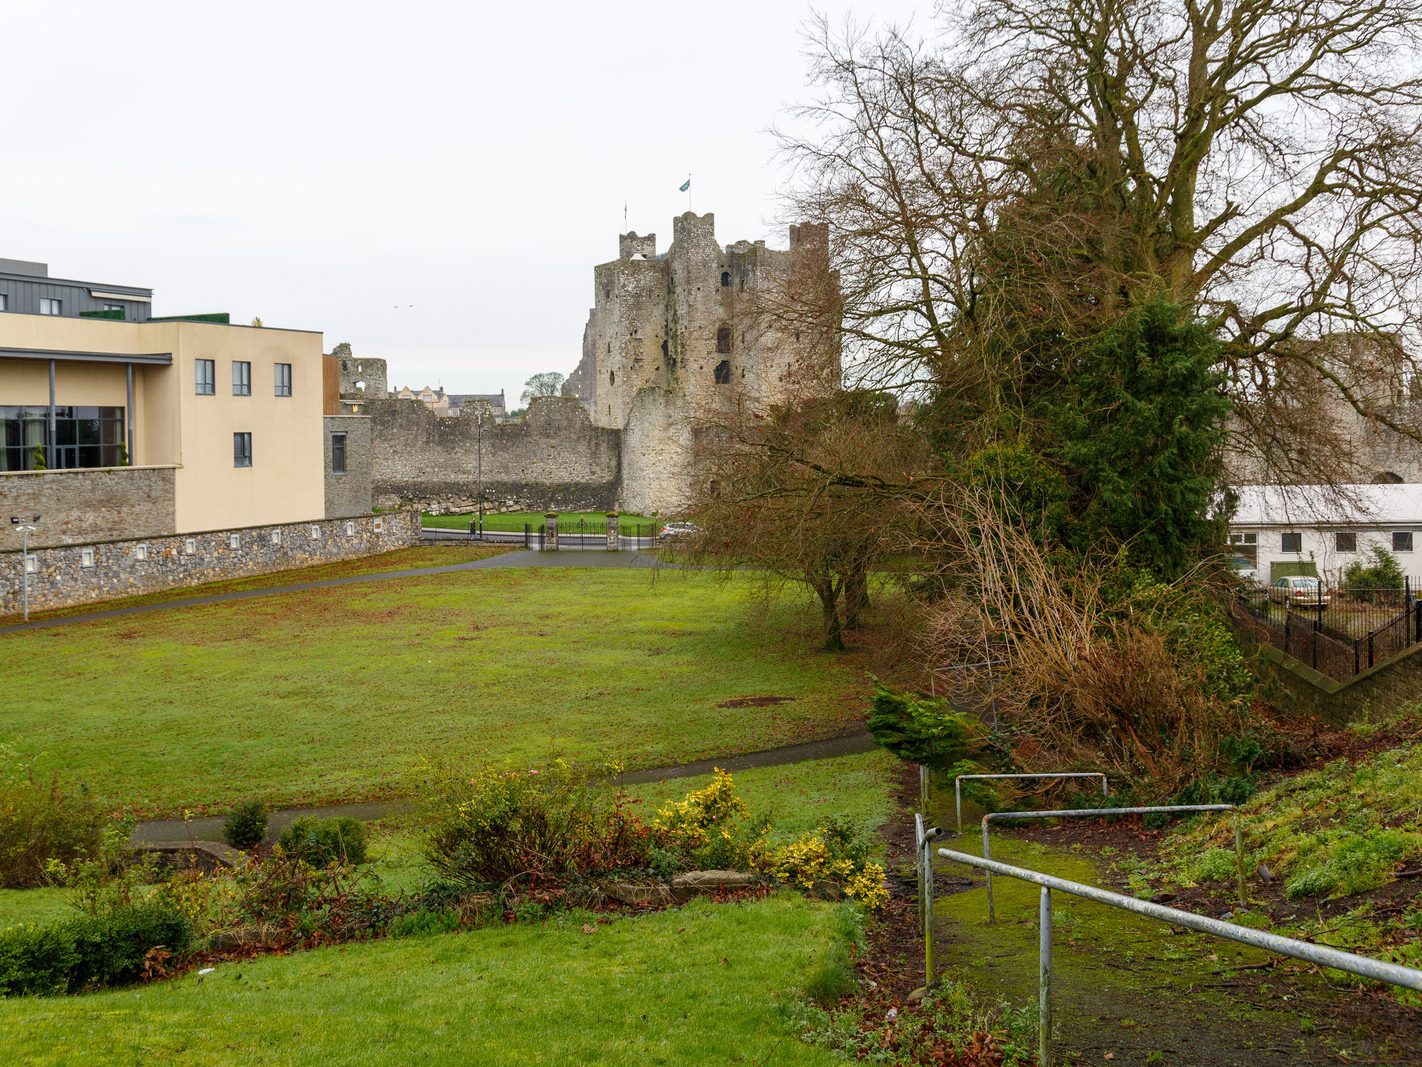 ON ST STEPHEN'S DAY I VISITED THE SOUTH BANK IN ORDER TO PHOTOGRAPH TRIM CASTLE [26 DECEMBER 2023]-226495-1